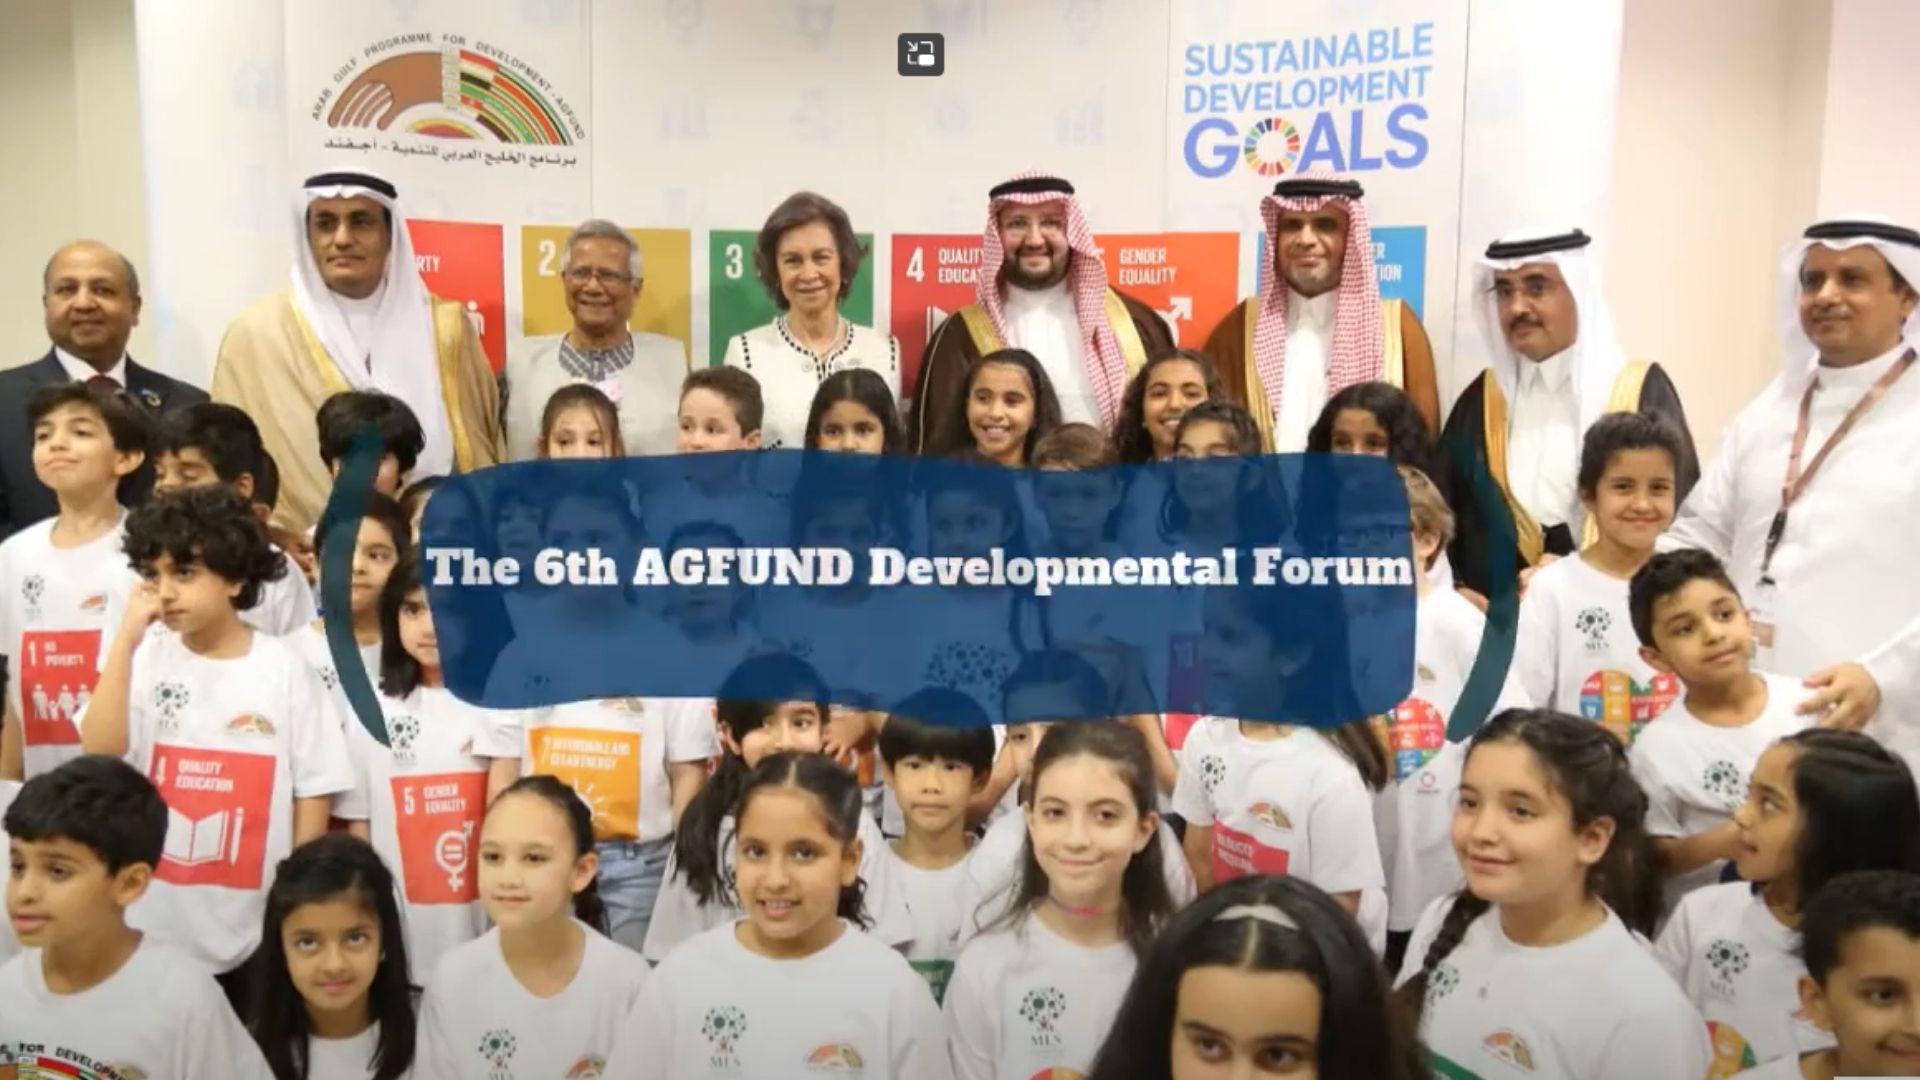 The 6th AGFUND Development Forum - A song by Children